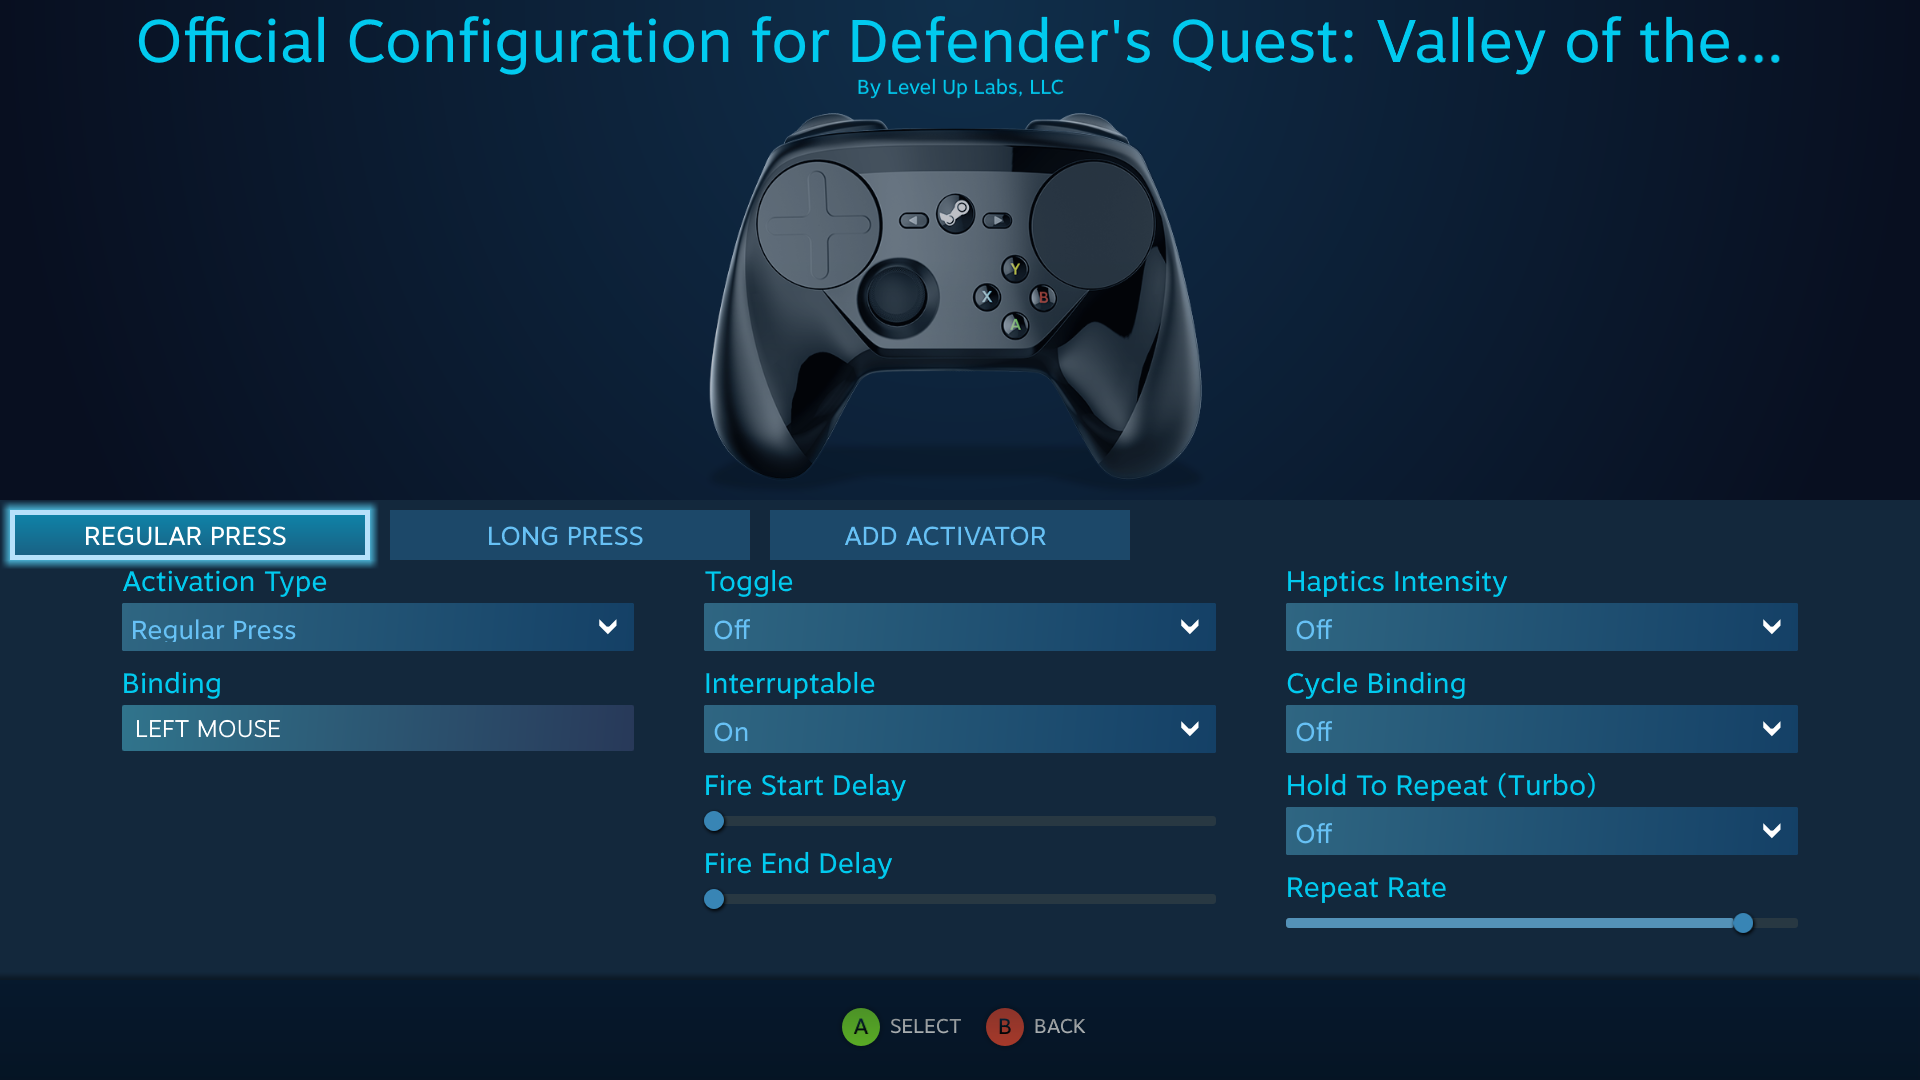 Defender's Quest Steam Controller Configuration Screen -- Battle Actions, LEFT MOUSE binding